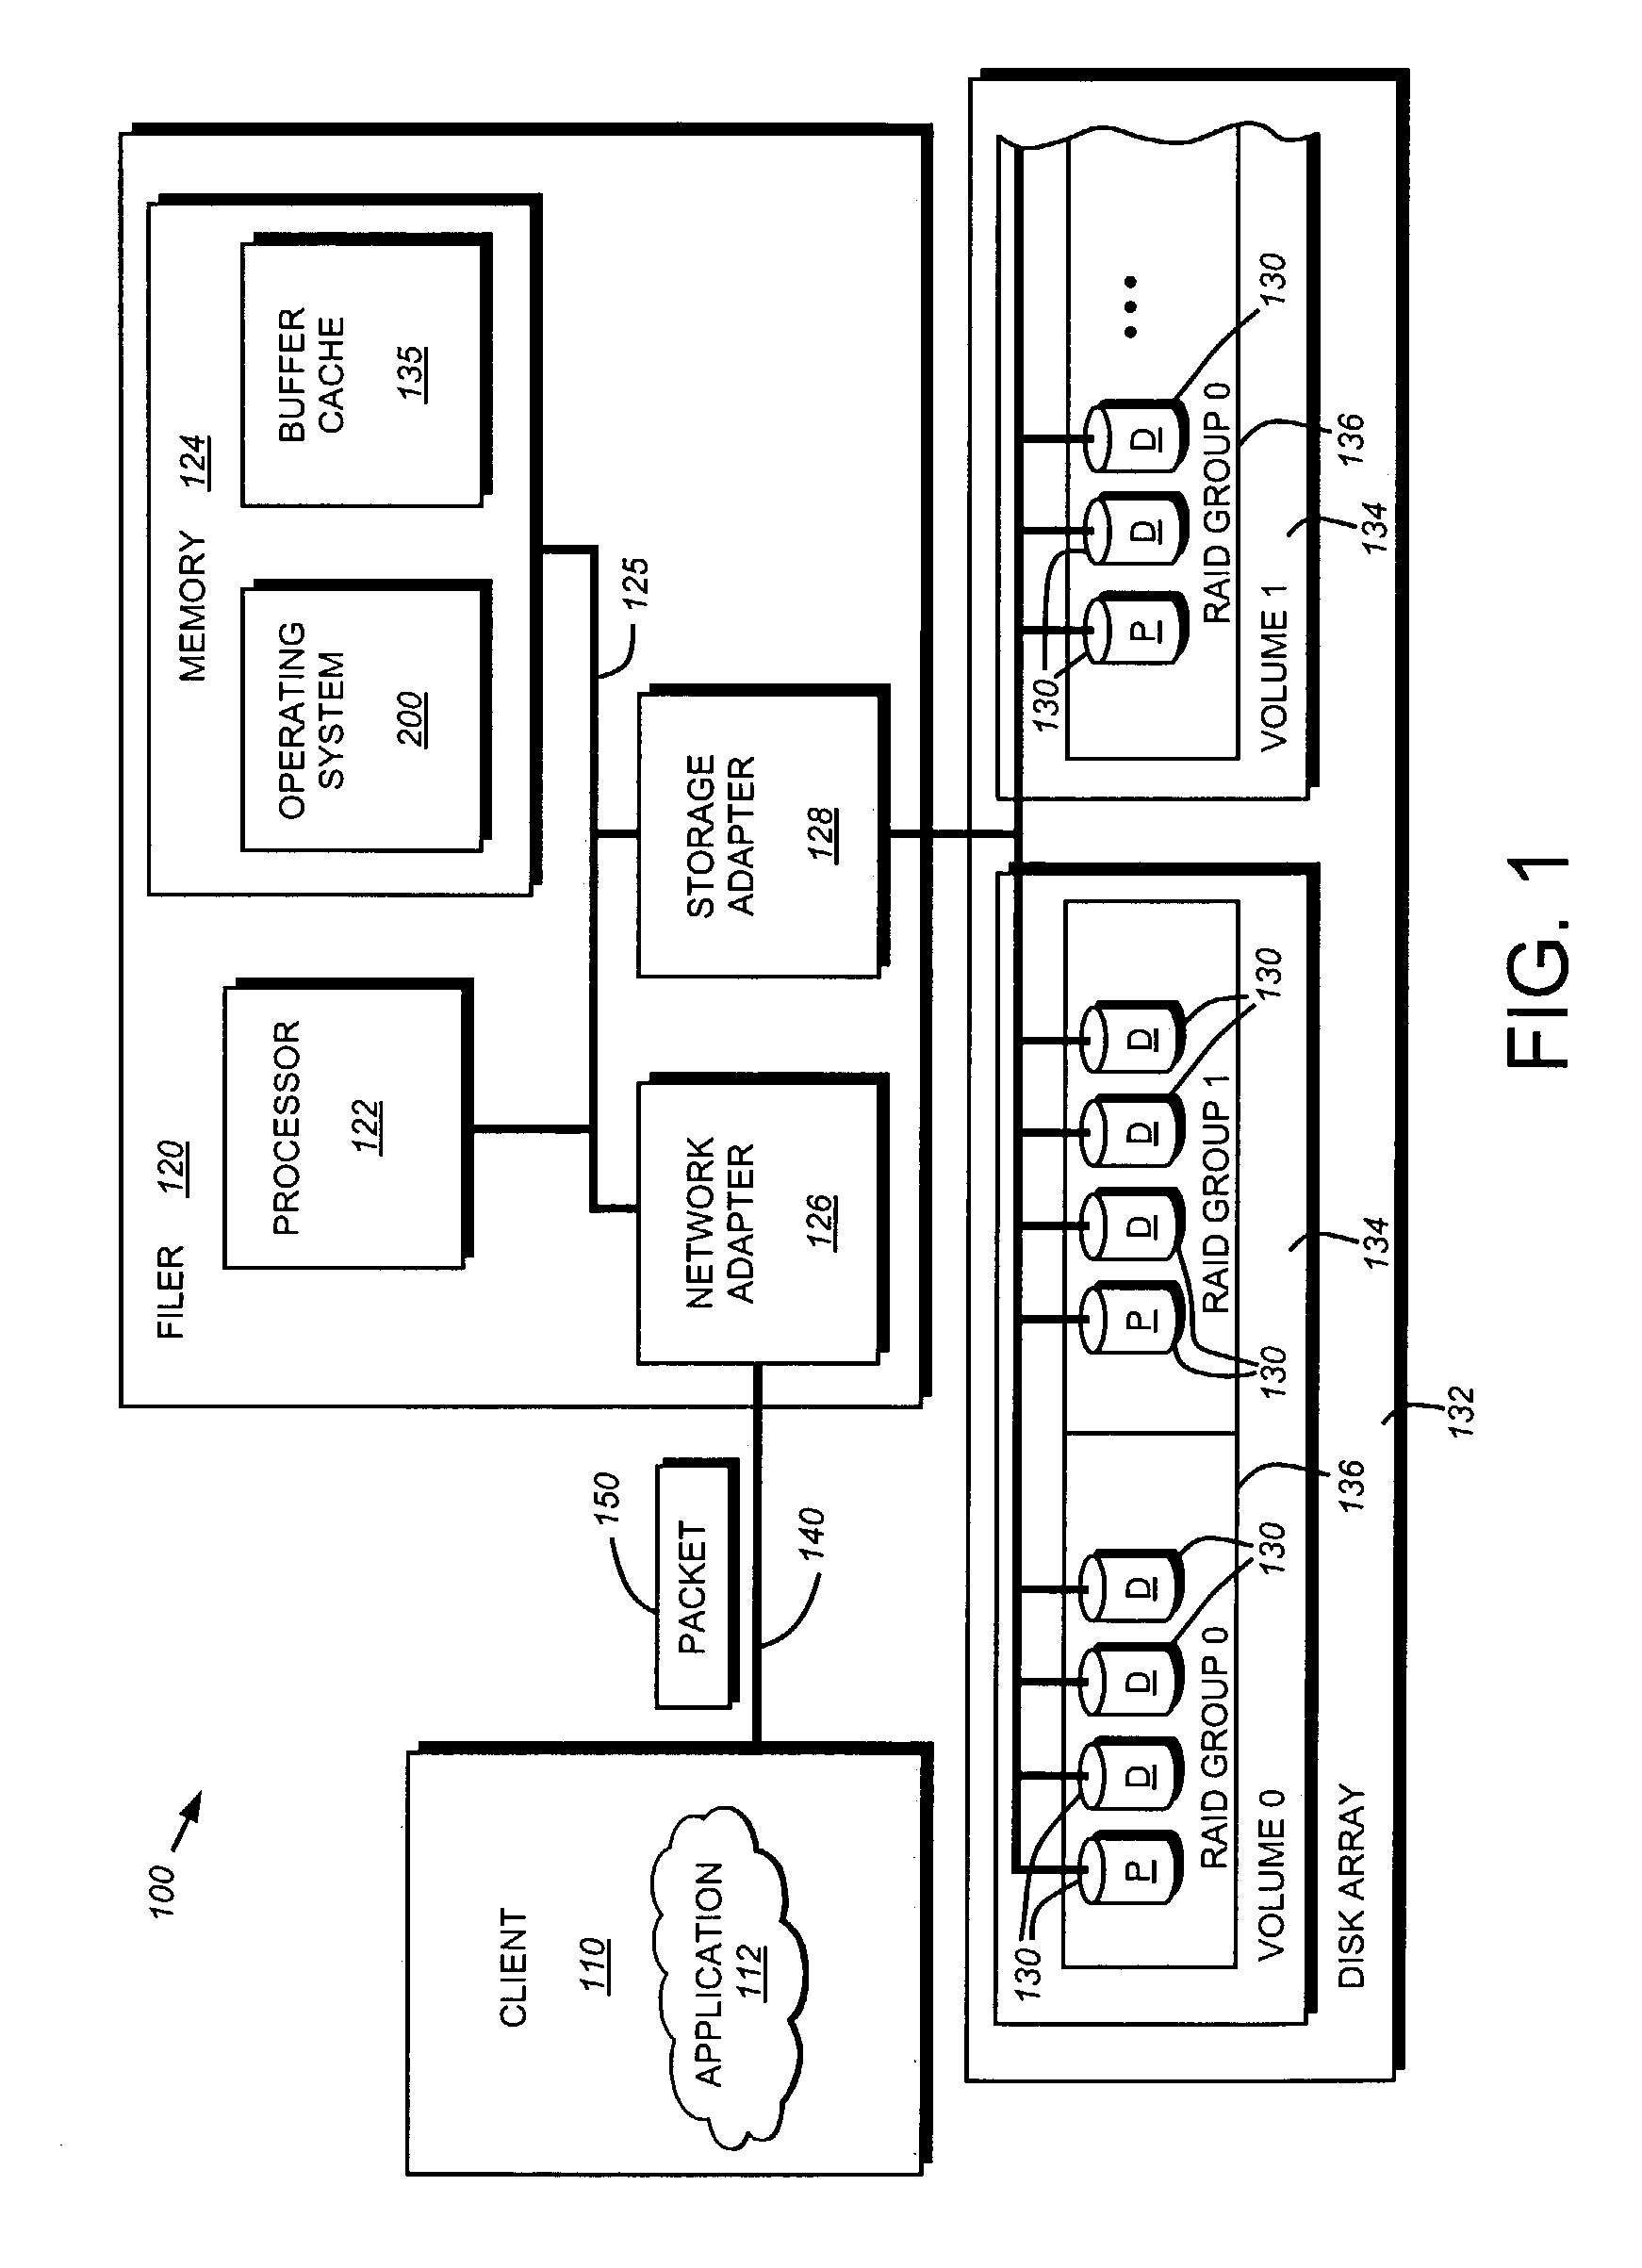 System and method for logging disk failure analysis in disk nonvolatile memory